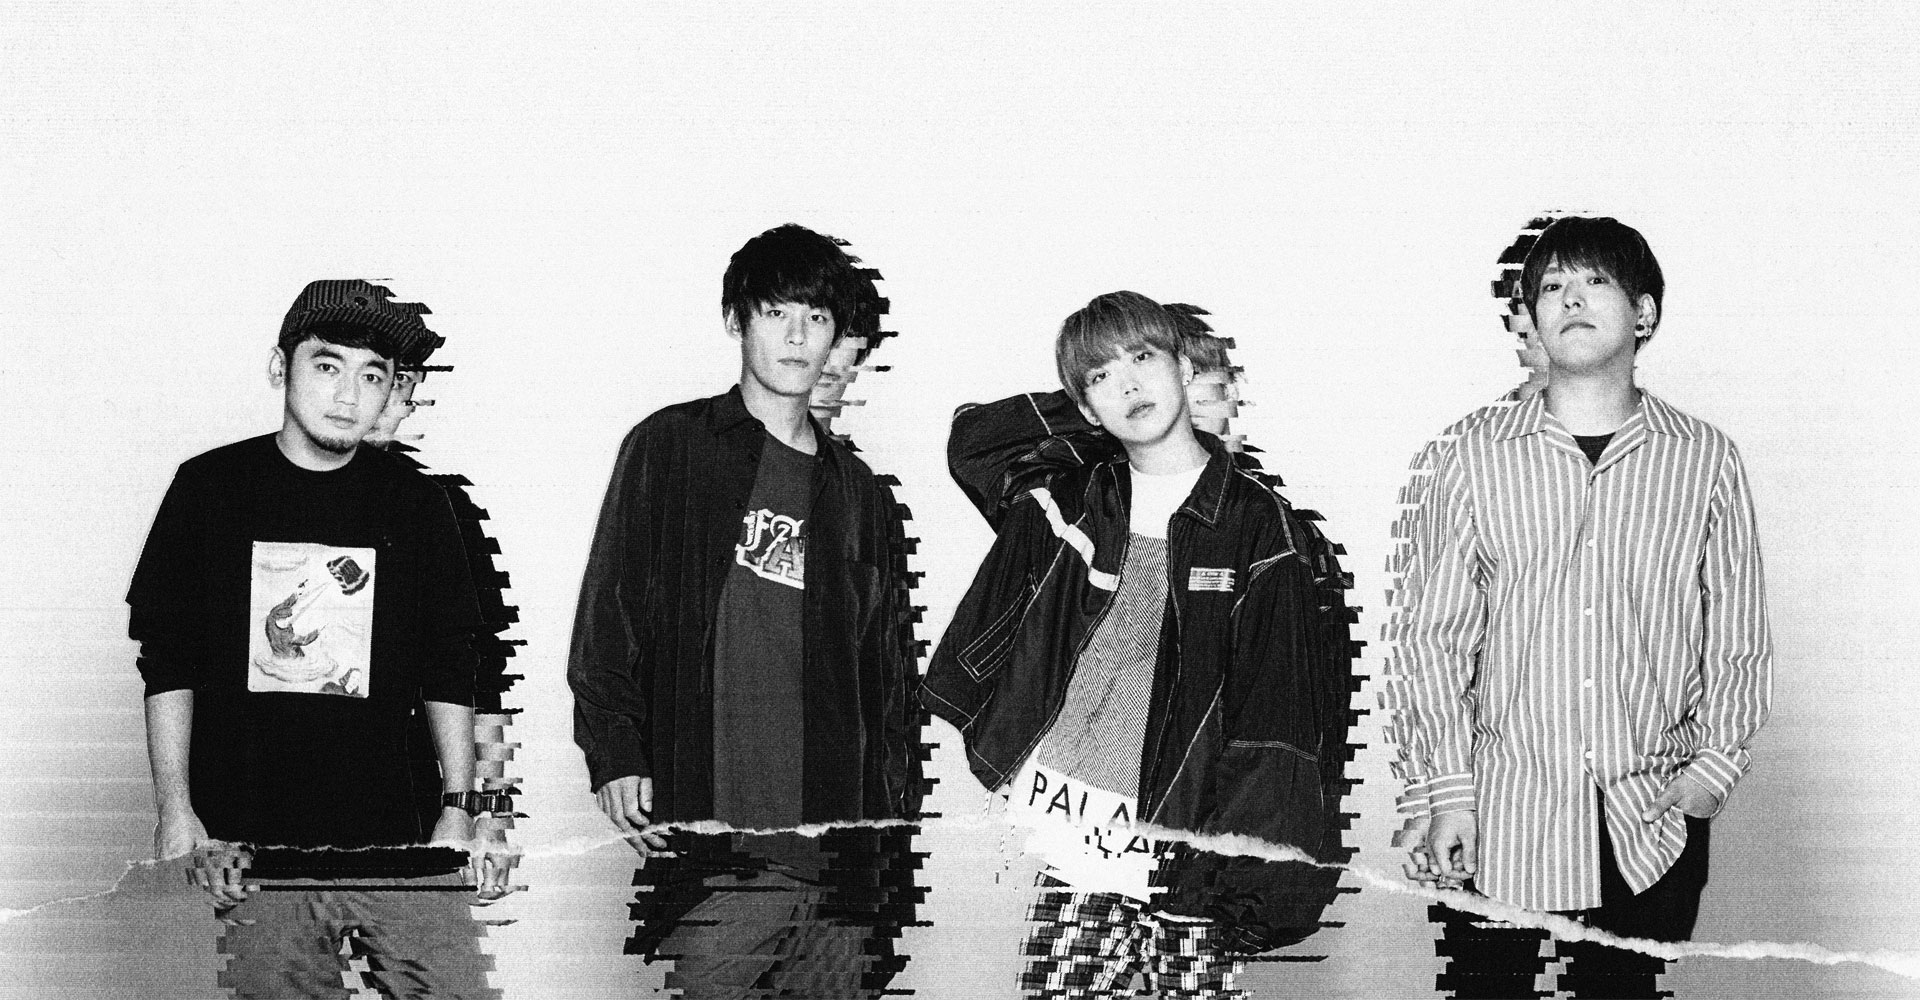 04 Limited Sazabys Official Web Site